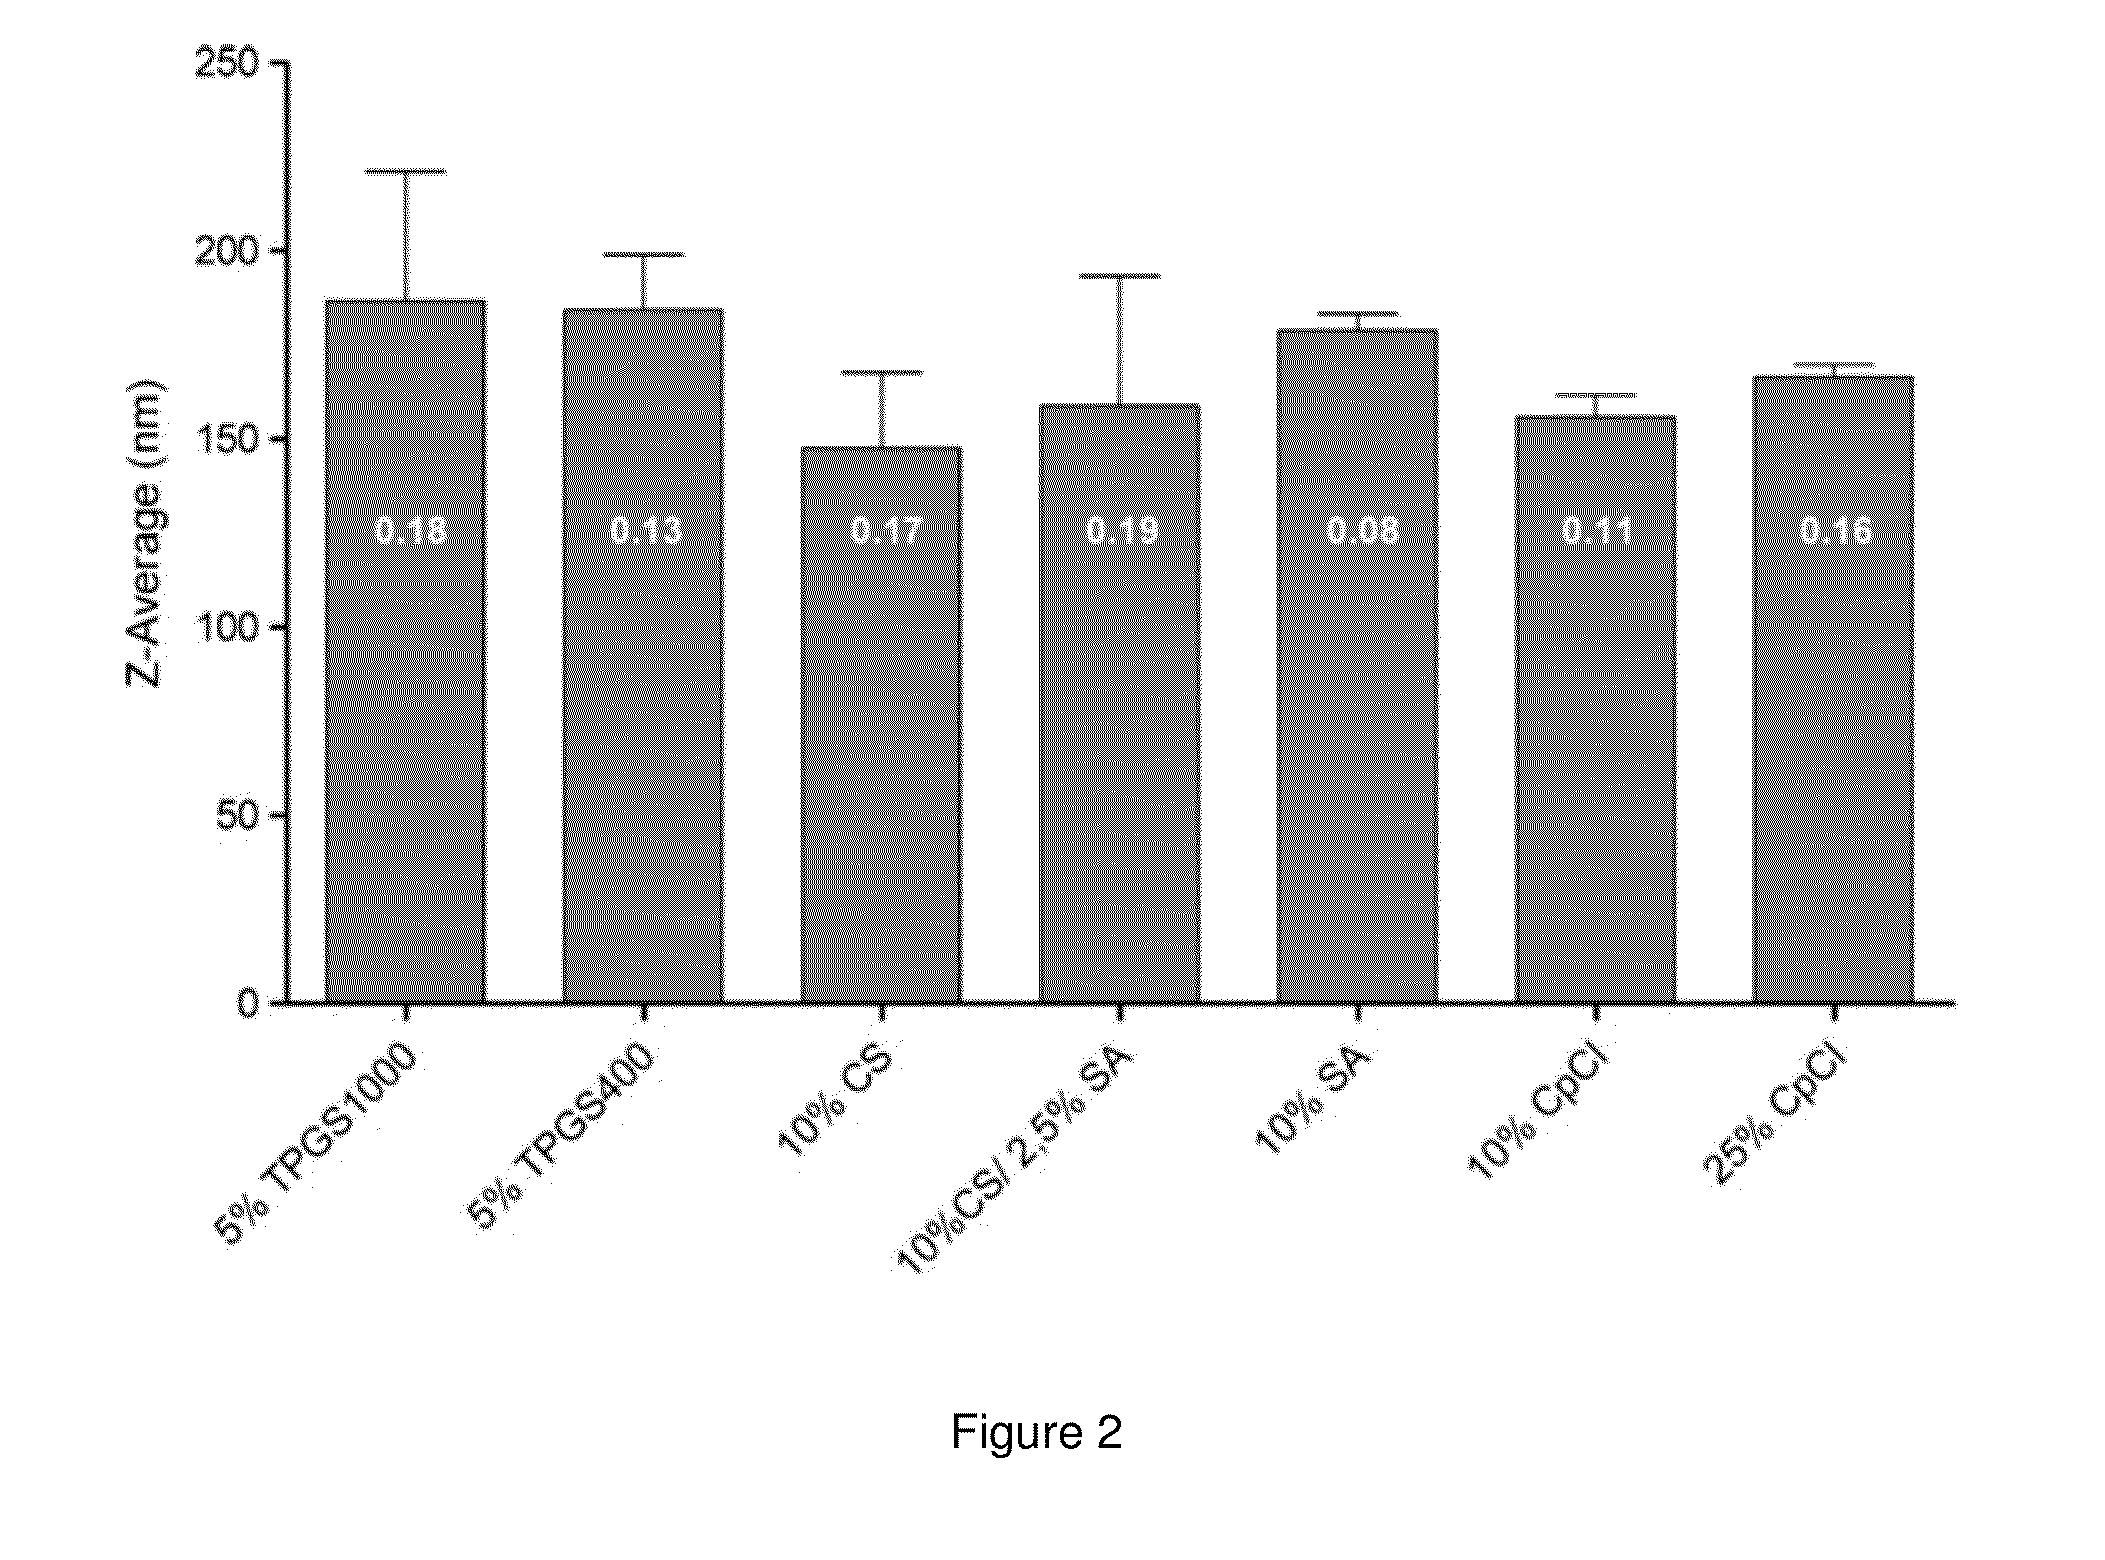 Liposomes containing permeation enhancers for oral drug delivery